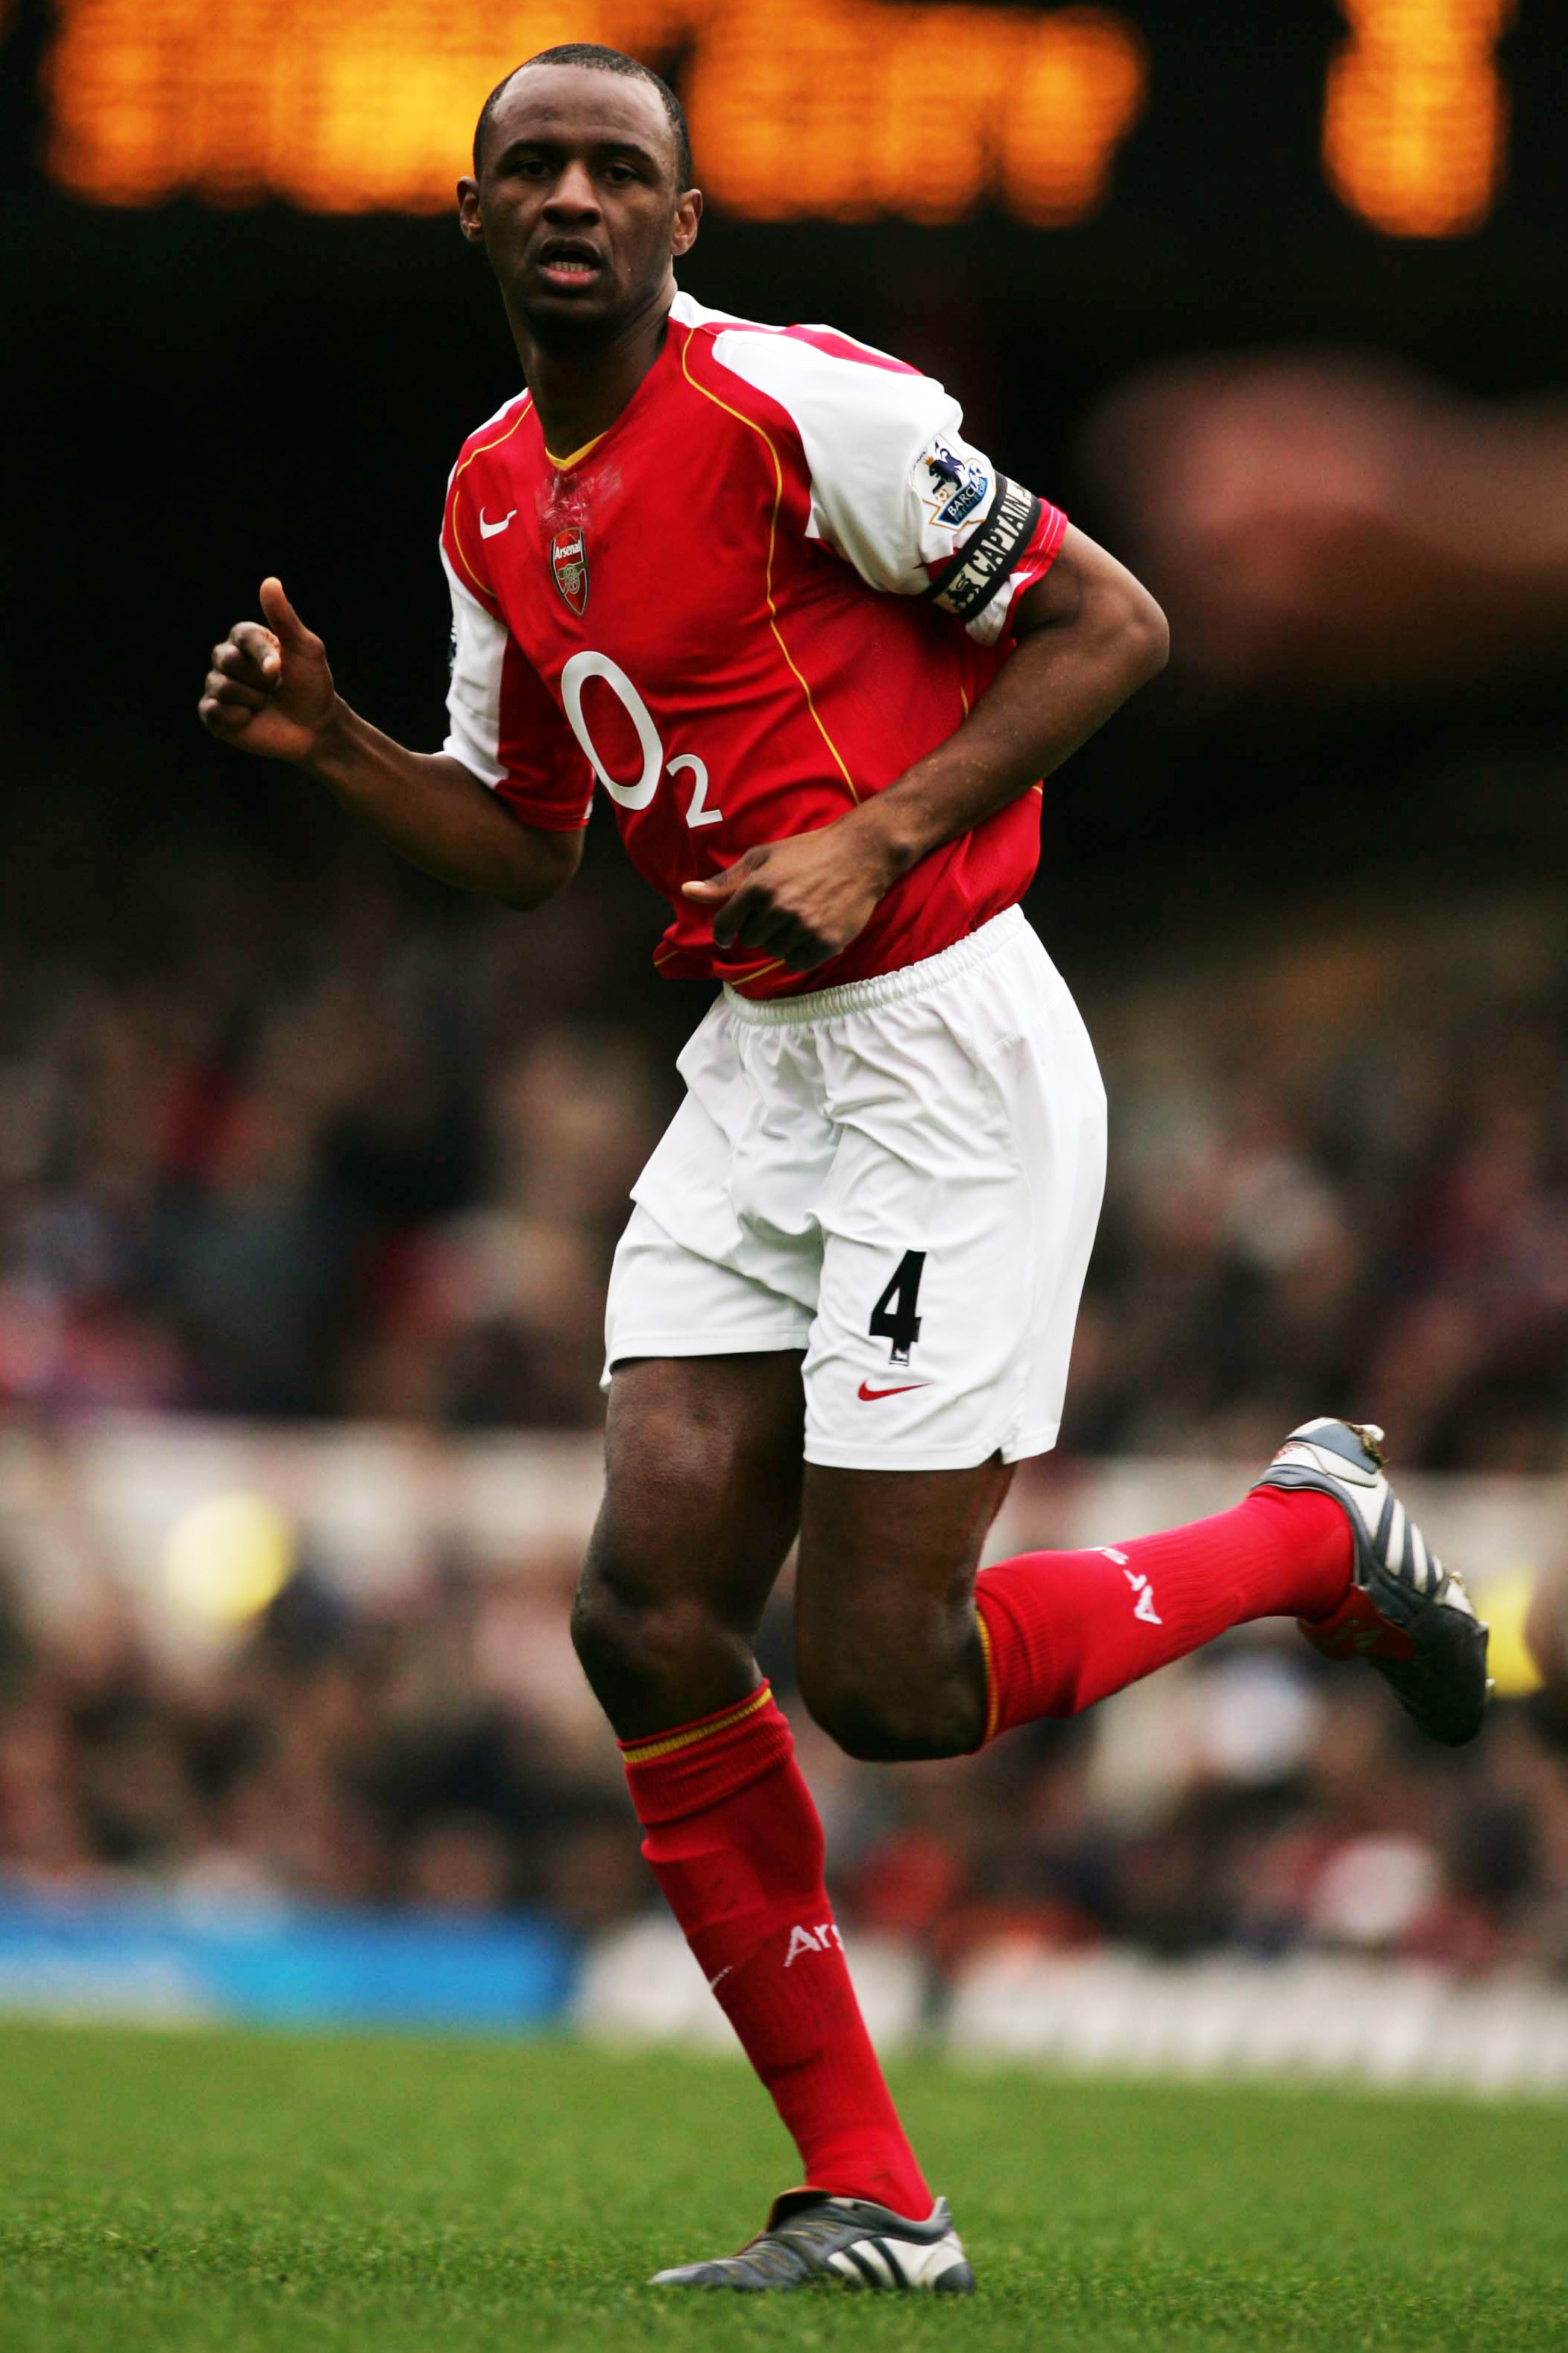 LONDON ENGLAND. JANUARY 9. Patrick Vieira of Arsenal during the FA Cup Third Round match between Arsenal and Stoke City at Highbury on January 9, 2005 in London, England. (Photo by Mark Thompson/Getty Images)